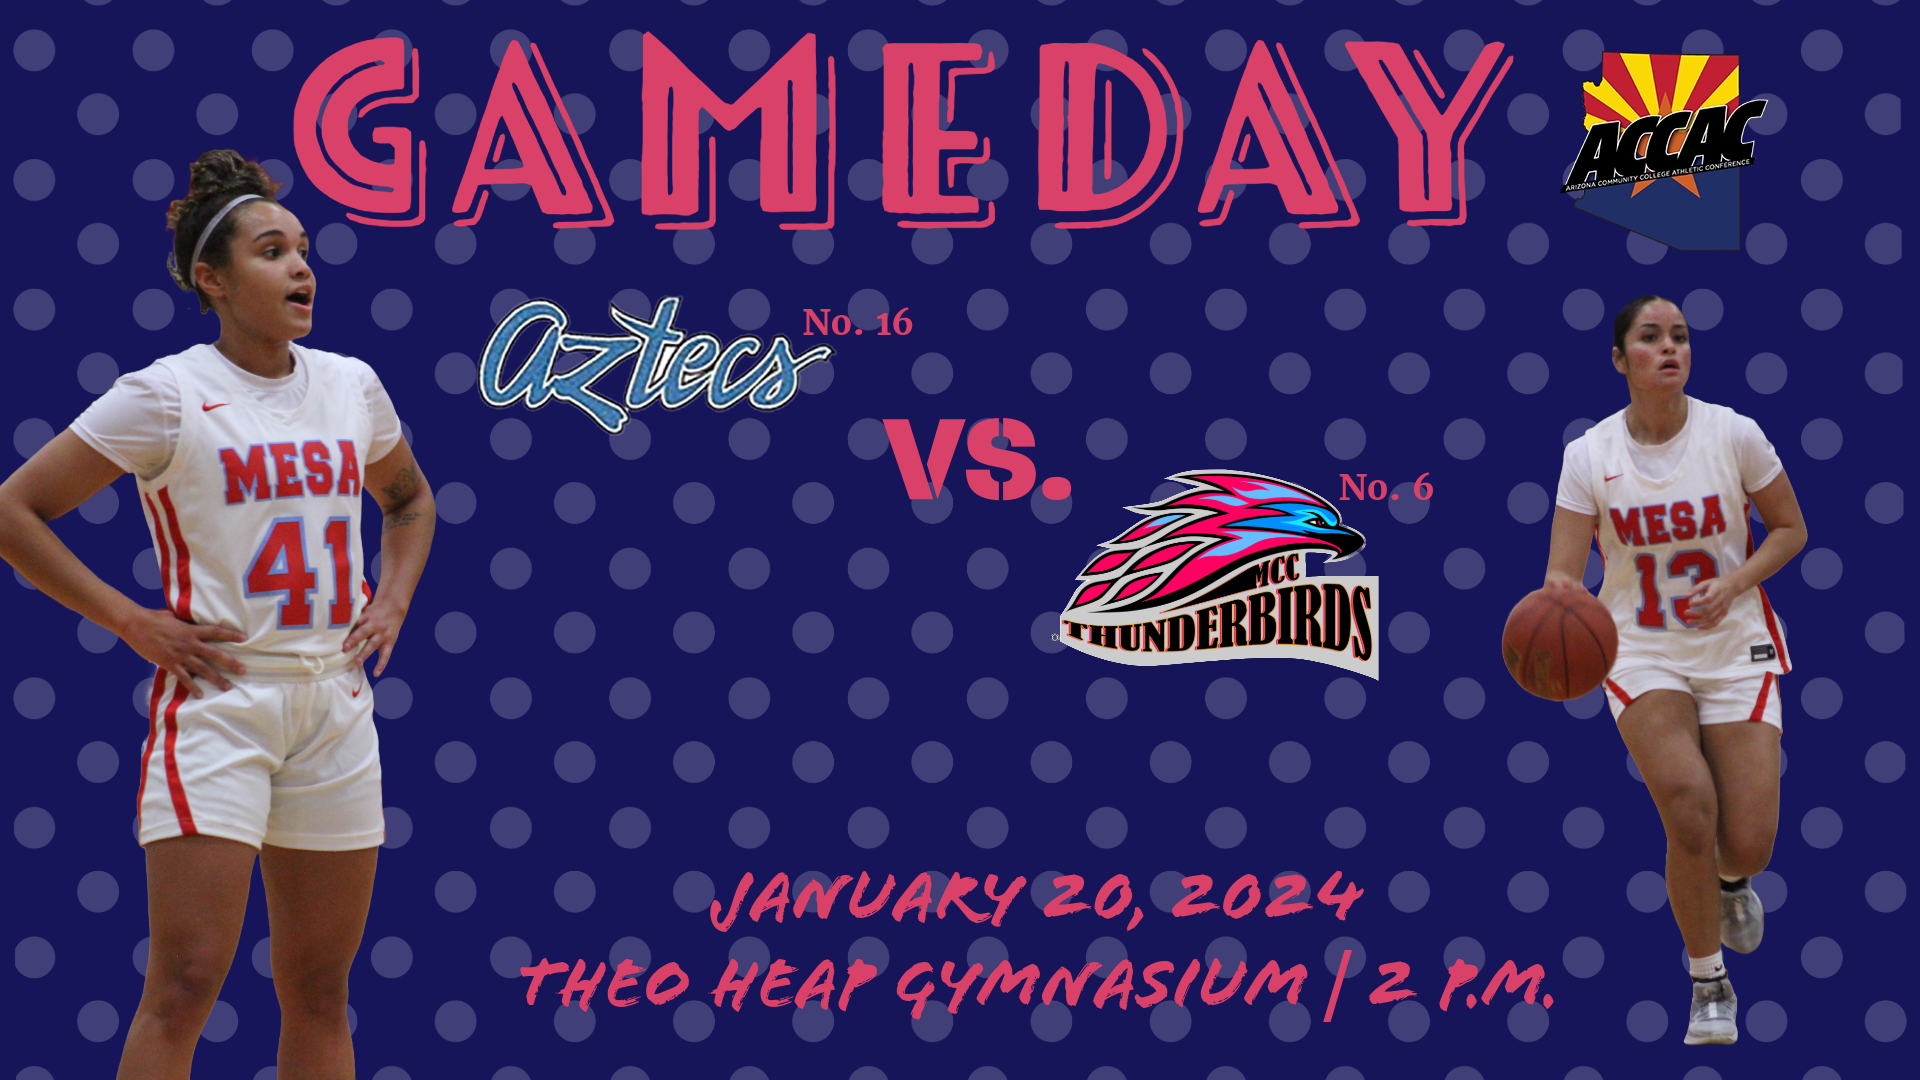 No. 6 Women's Basketball hosts No. 16 Pima in their second meeting of the season